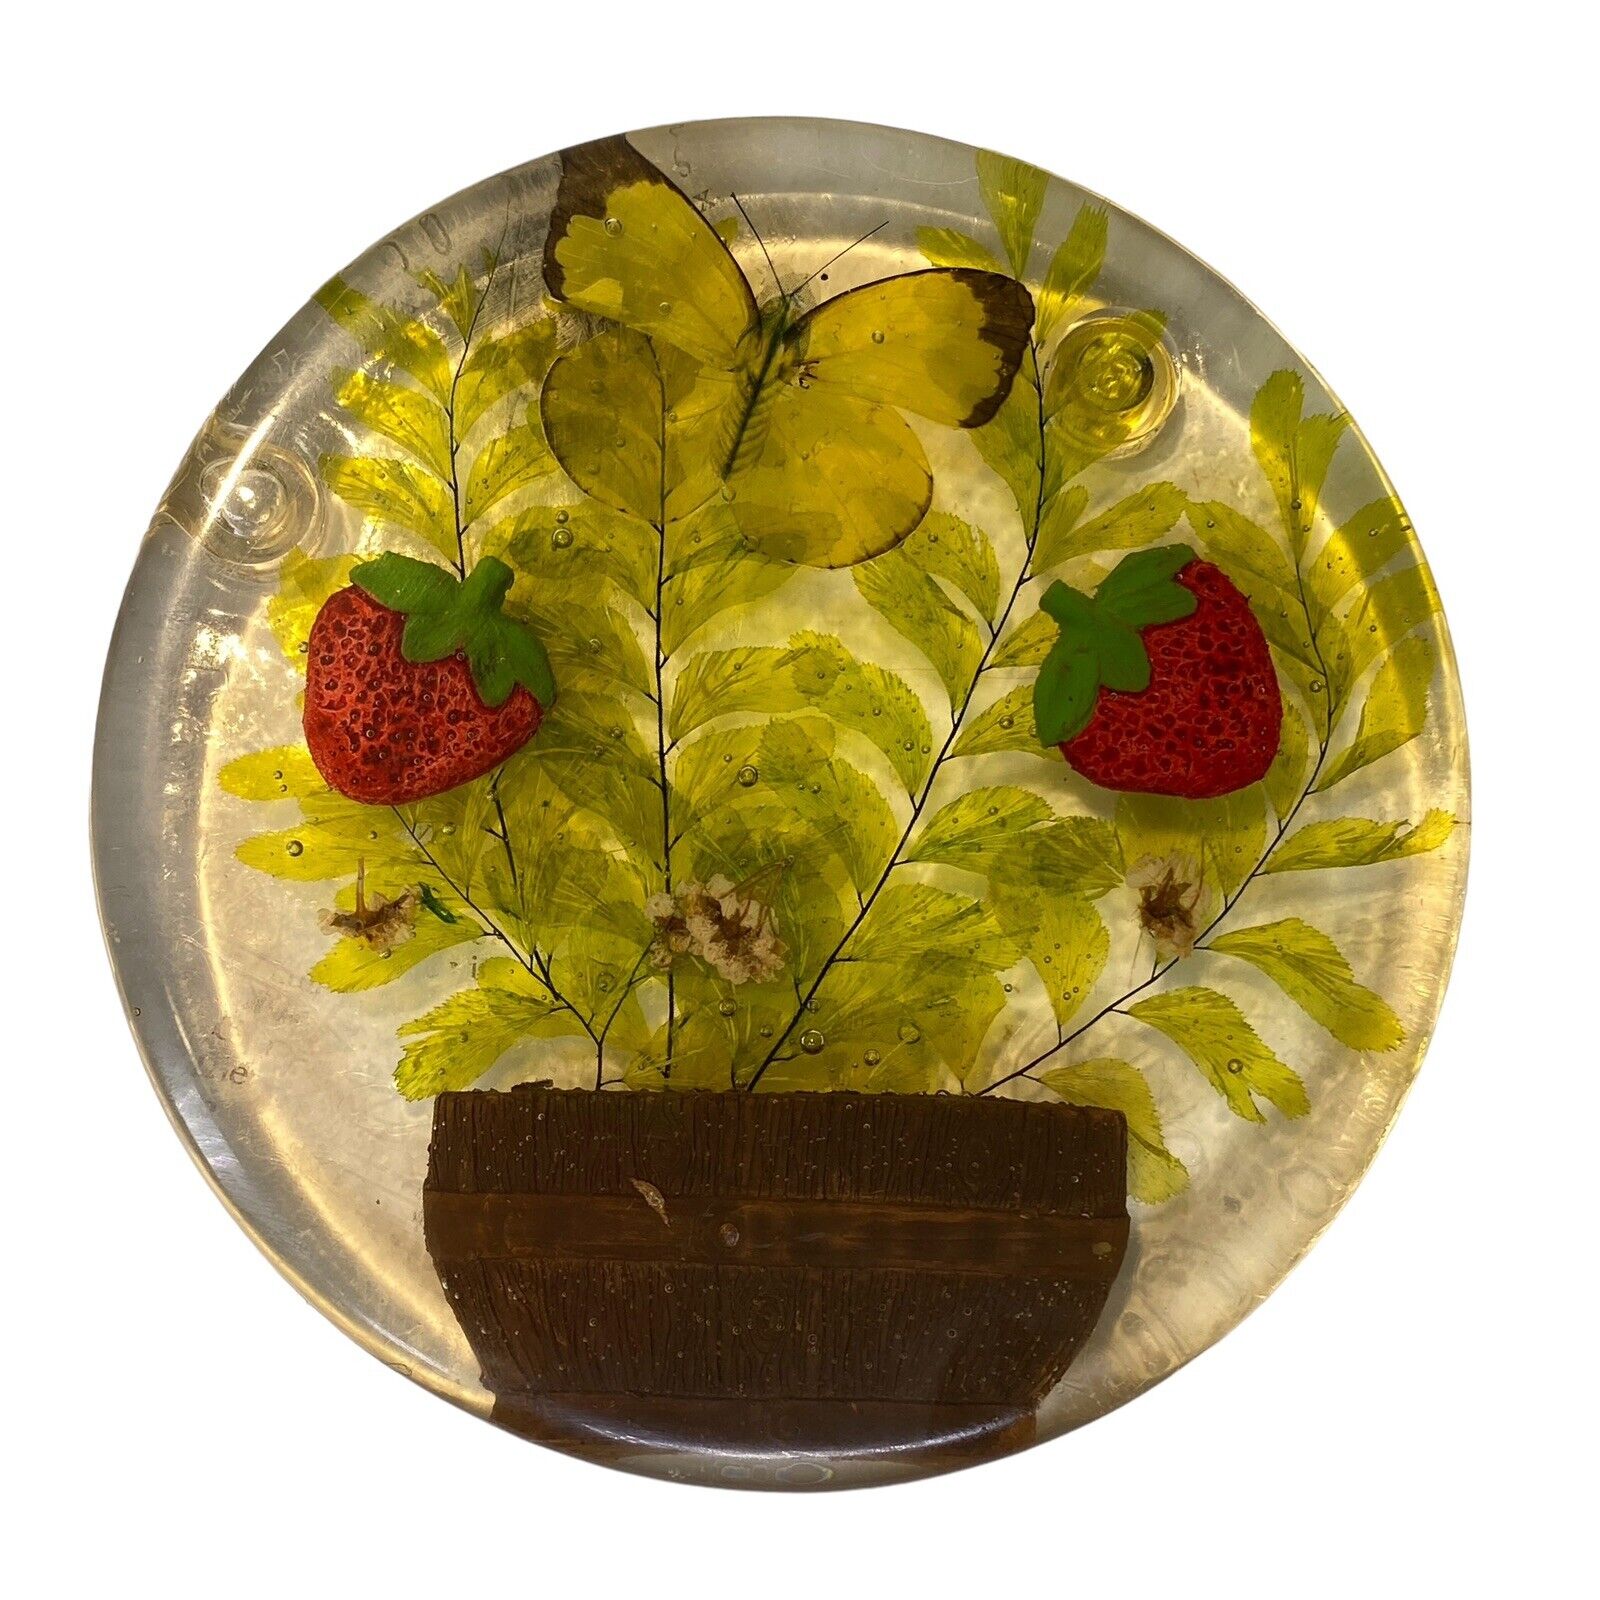 Vintage Butterfly Strawberry Trivet By Design Gifts Intern’L Inc